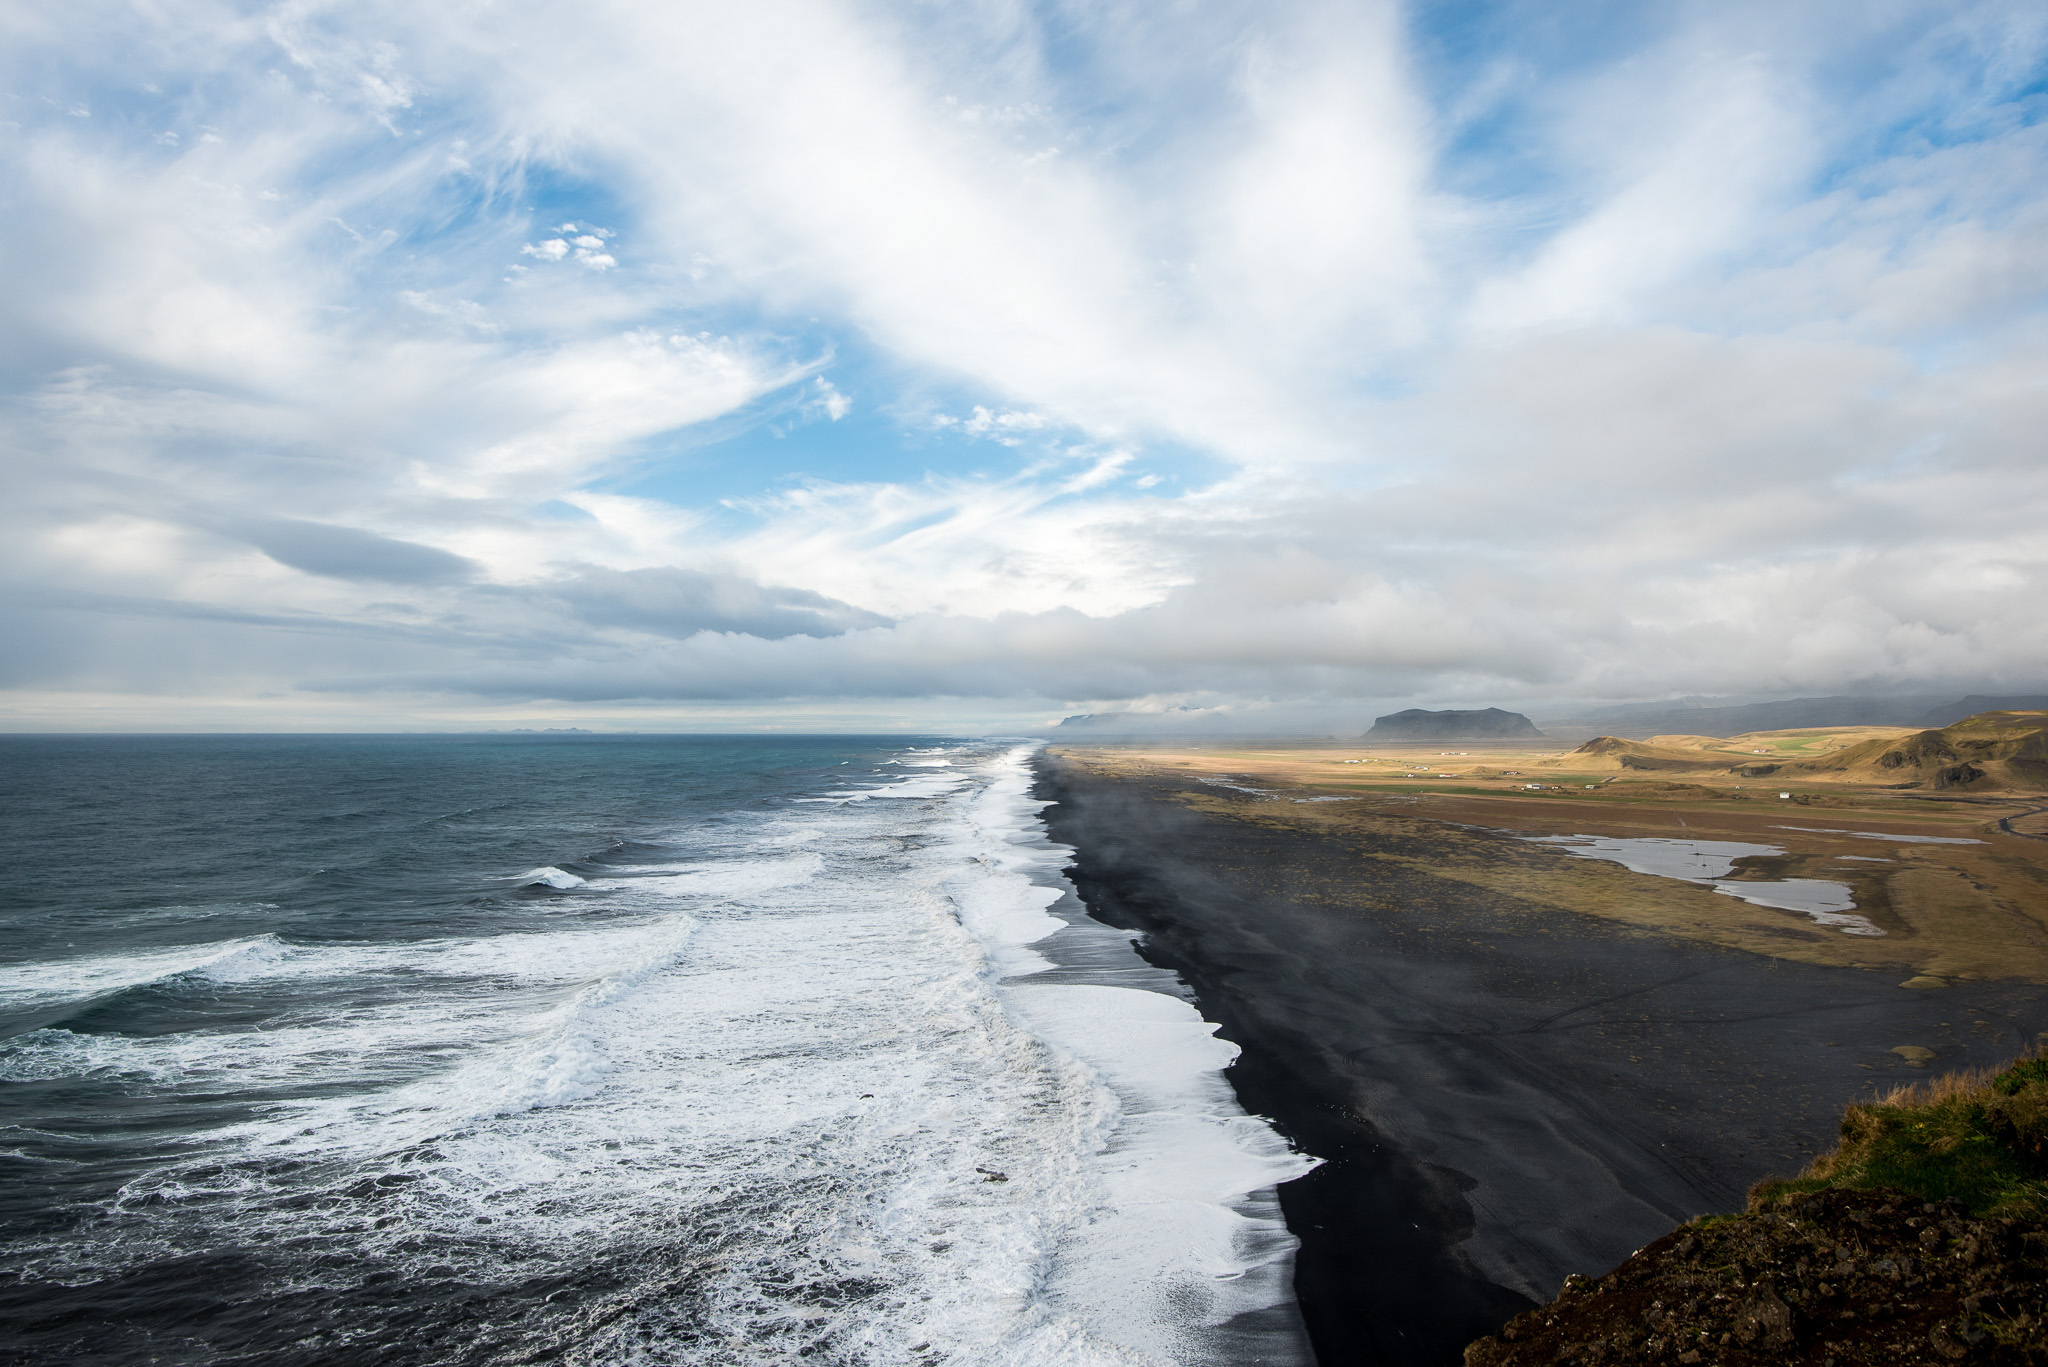 Overlooking expanses of black sand beach under the Dyrholaey cliffs.